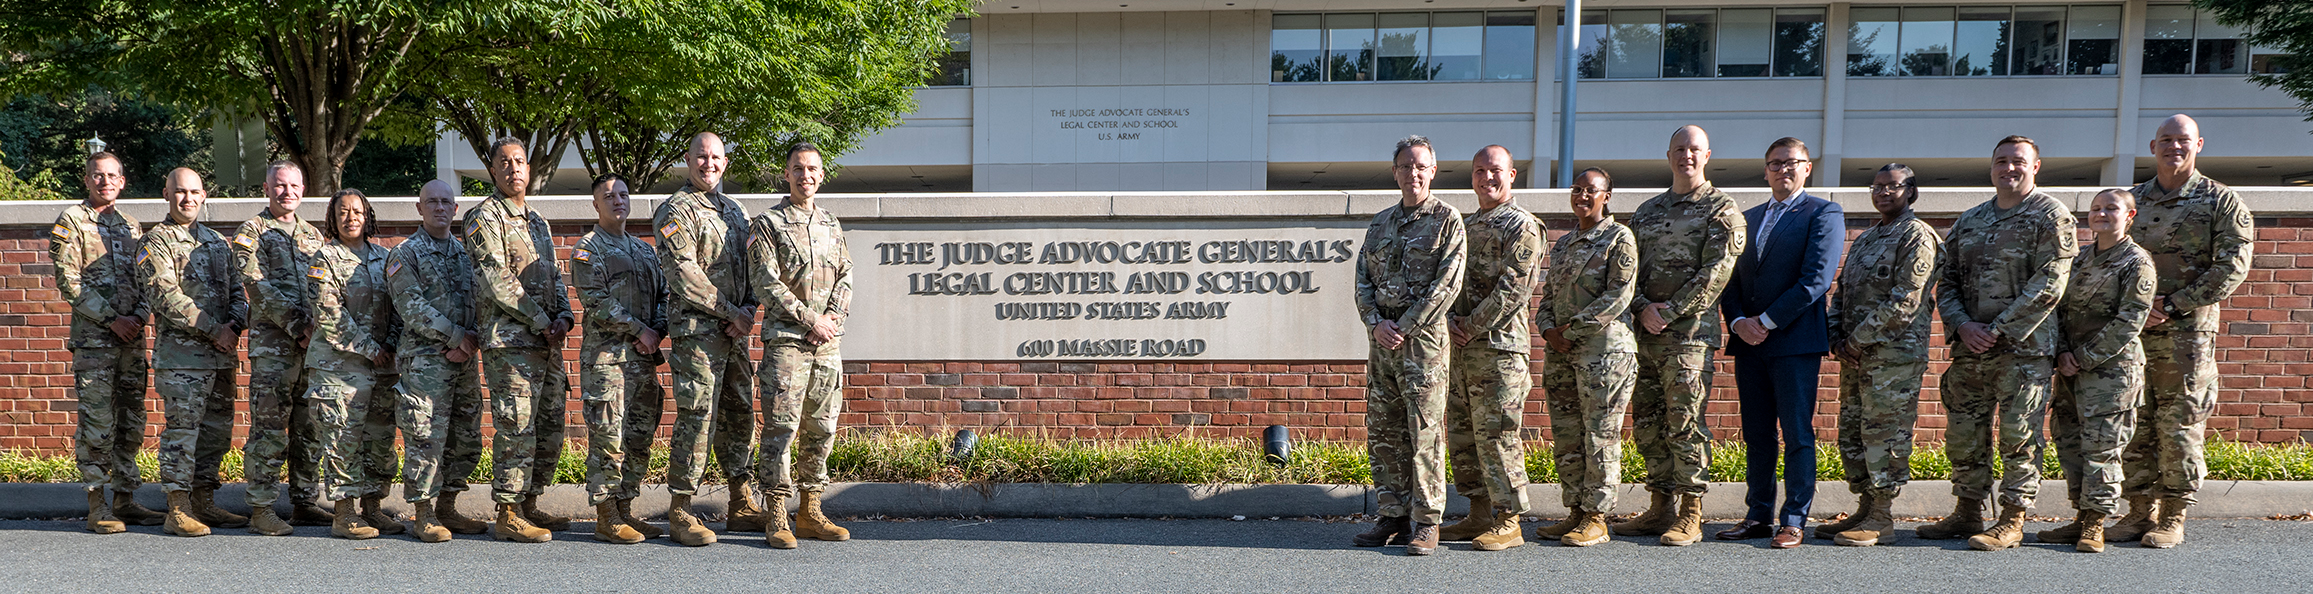 Soldiers posing in front of The Judge Advocate General's Legal Center and School